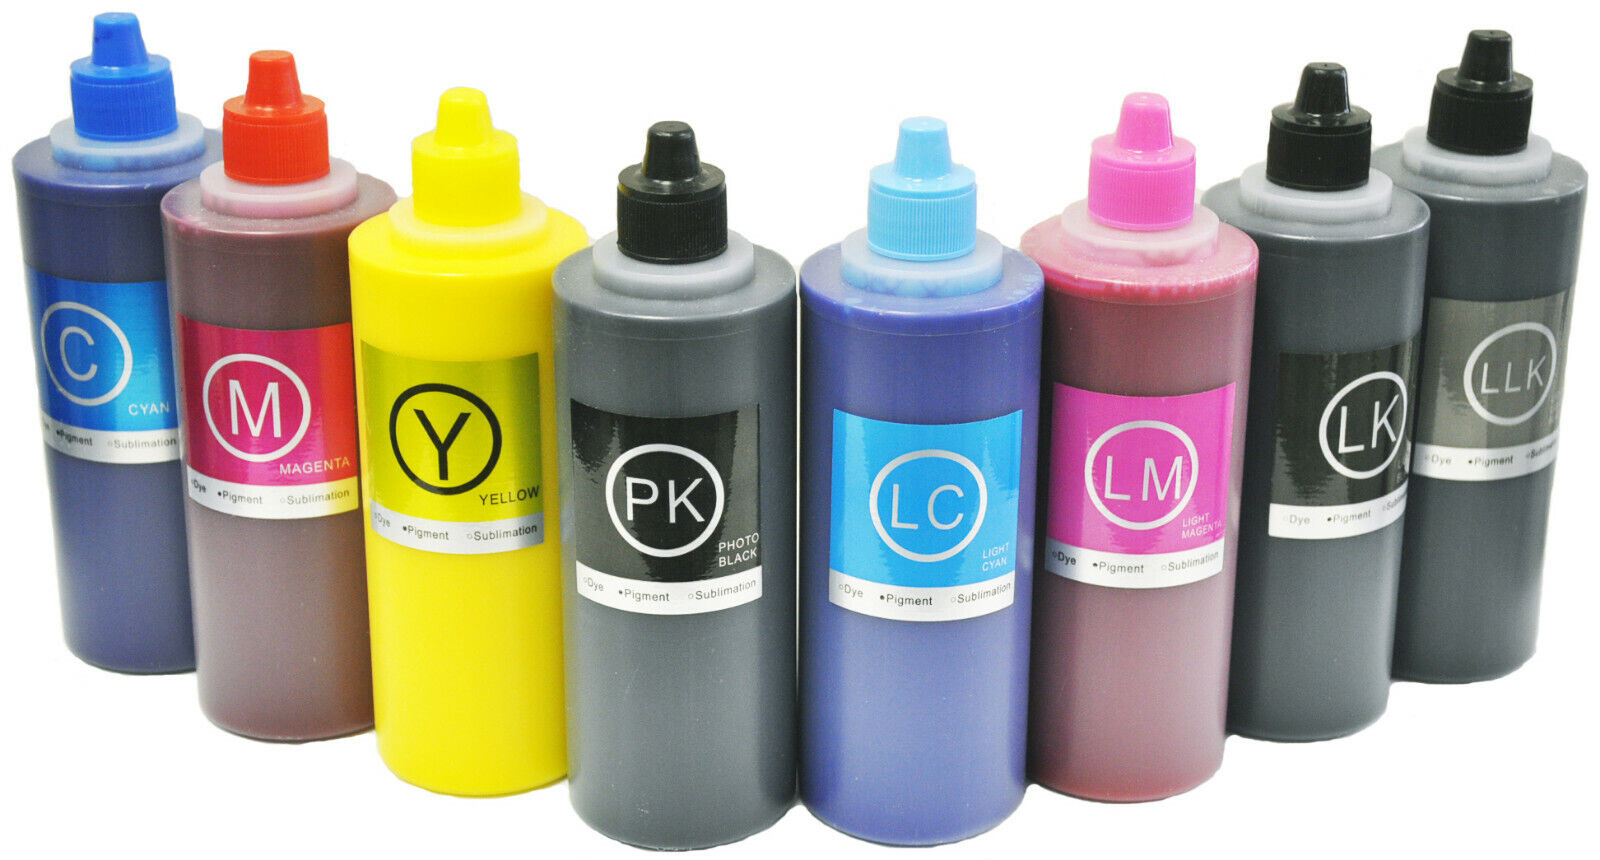 8x200ml UltraChrome K3 Pigment Compatible Ink for Stylus Pro 3880 4880 7880 9880